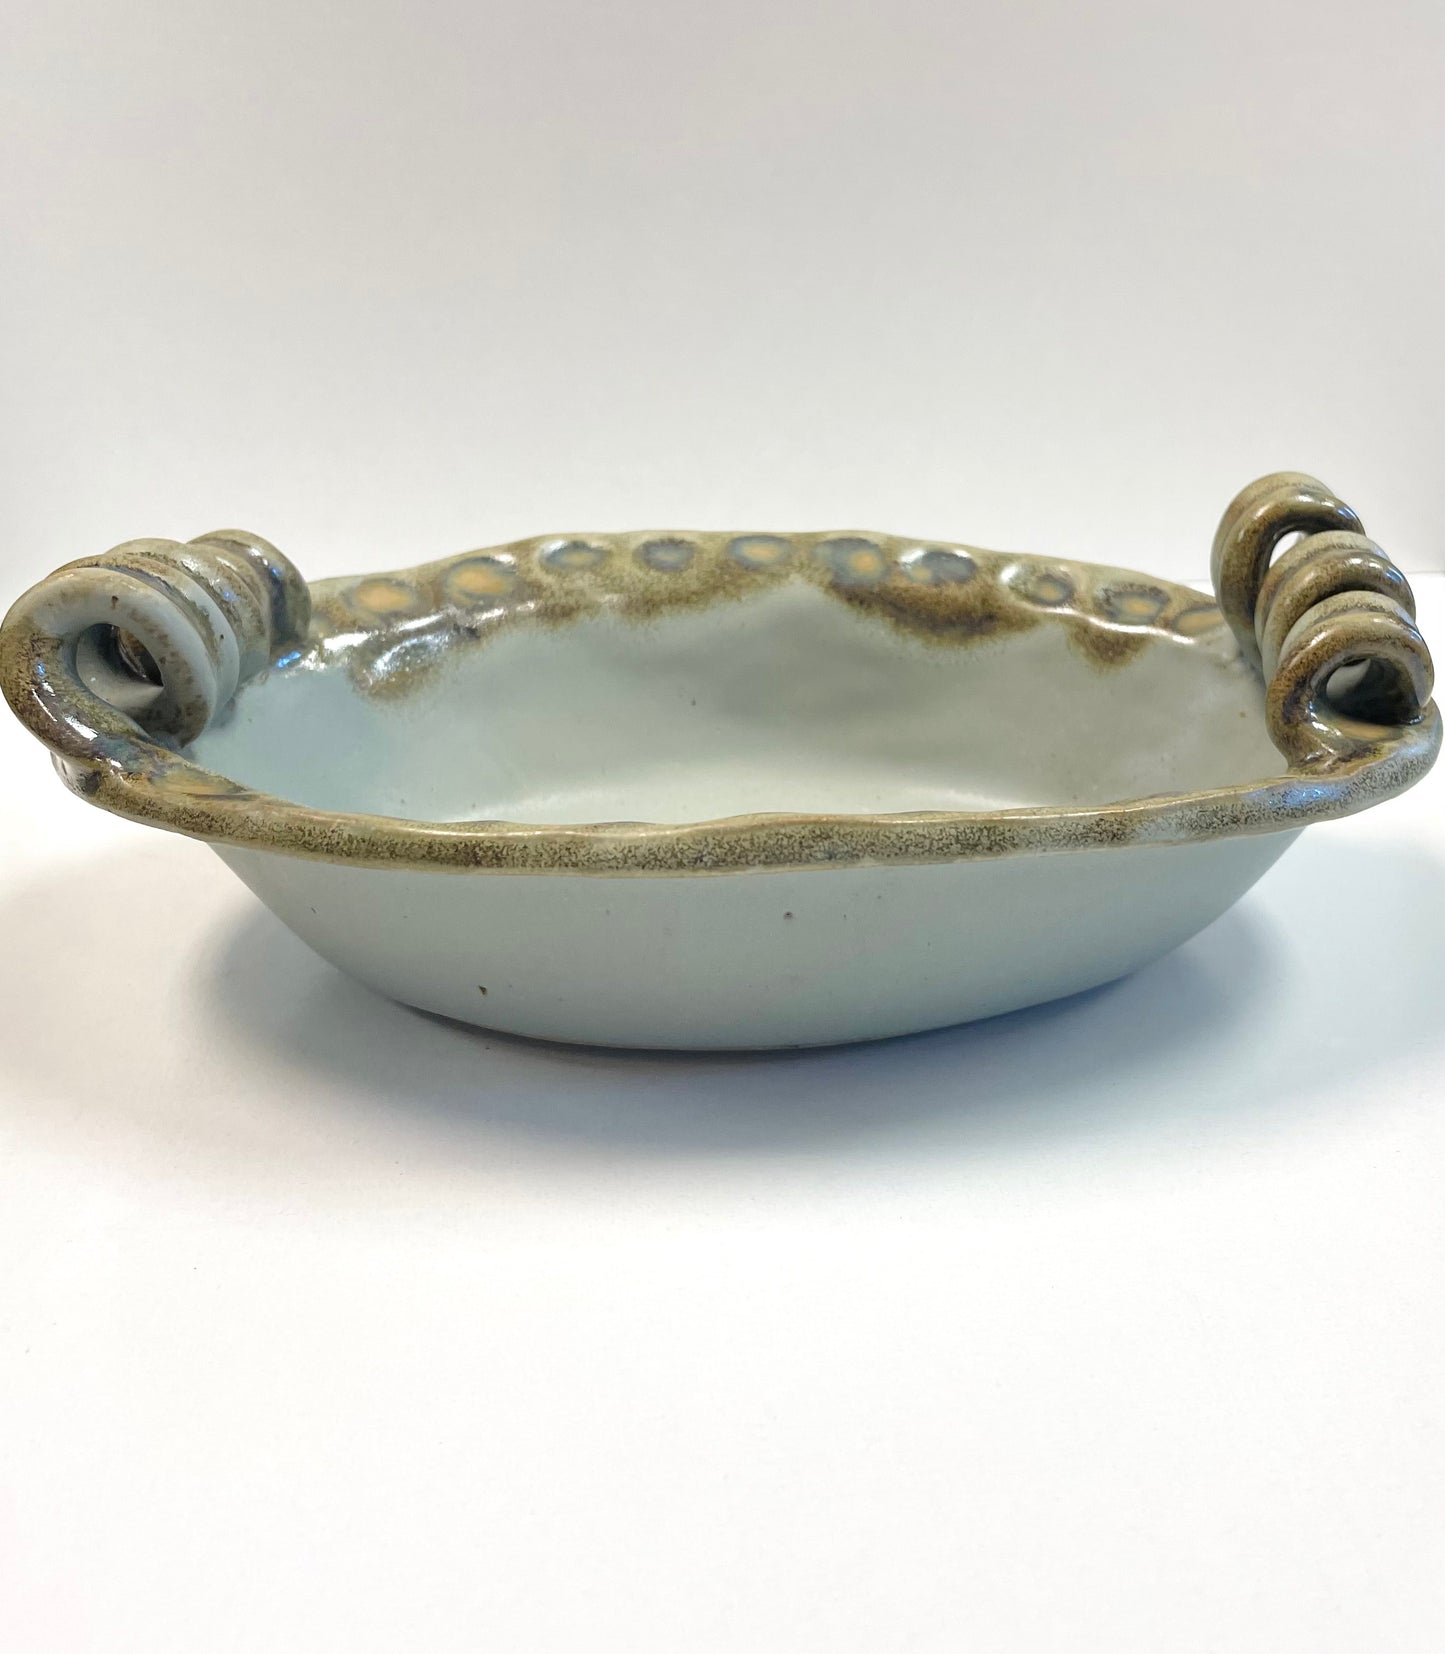 FP Small Oval Spiral Handled Bowl in River Rock